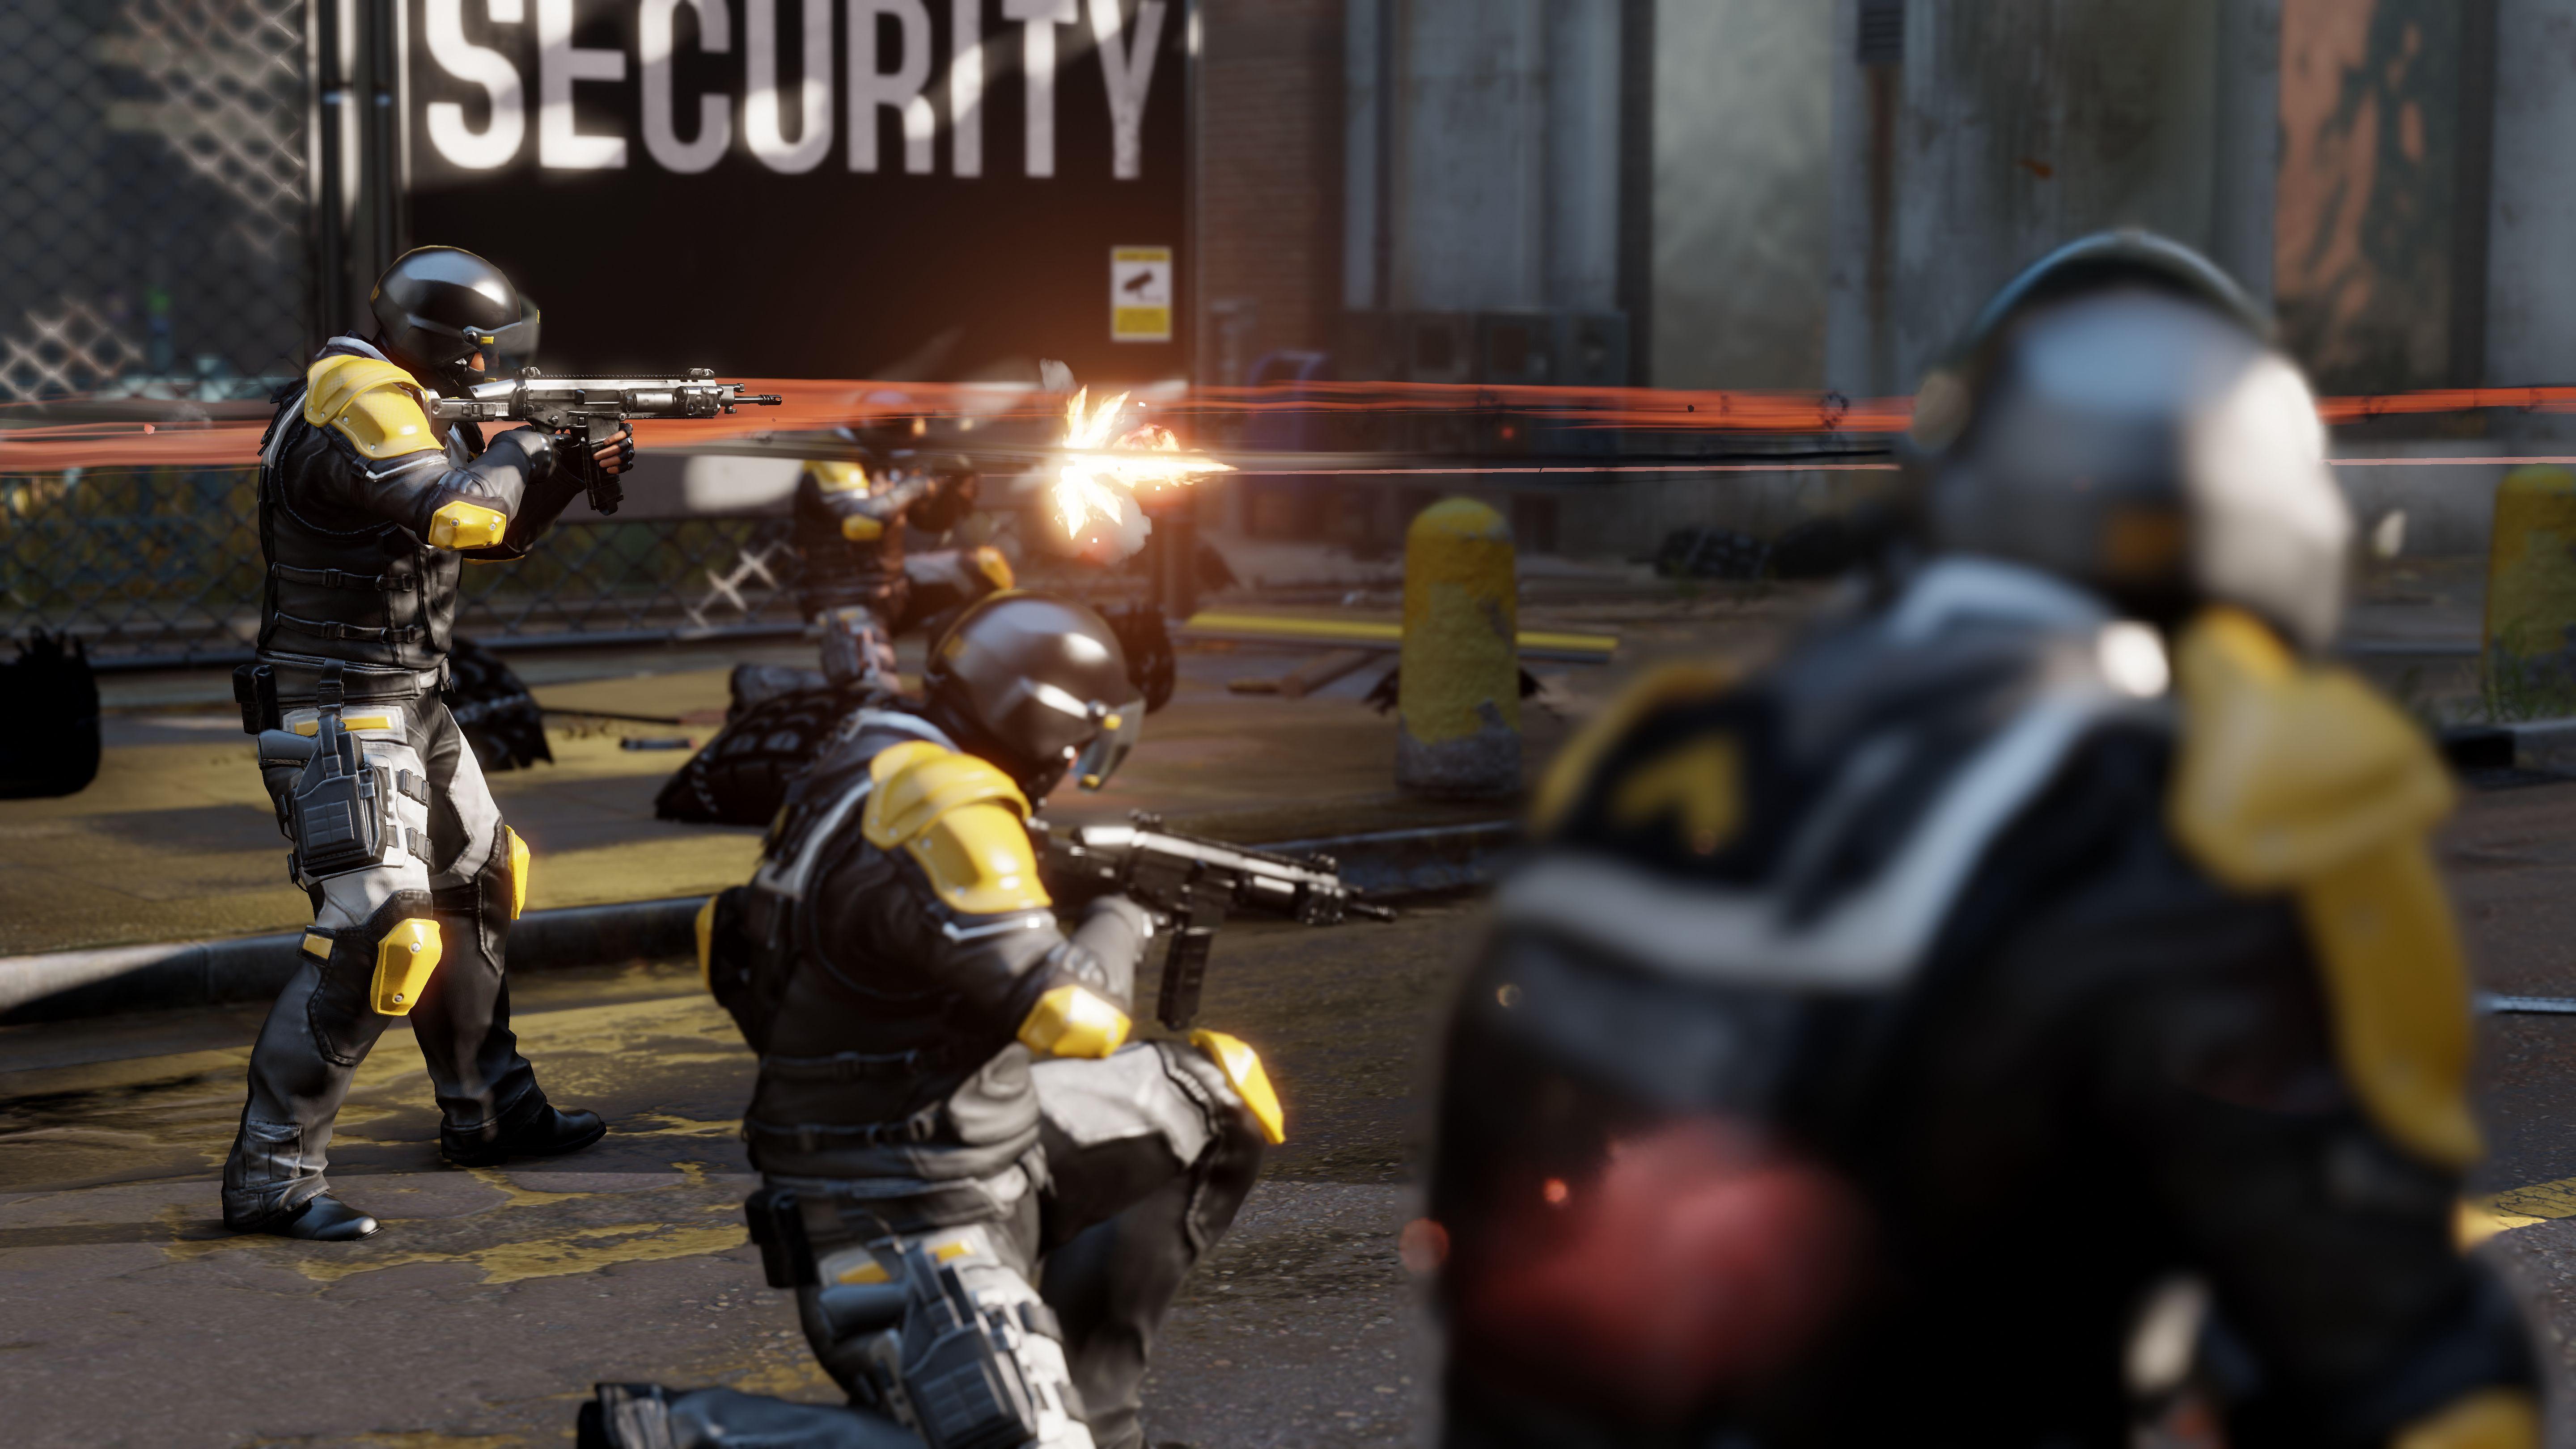 inFAMOUS_Second_Son_DUP-Soldiers-Firing_1382631512.jpg